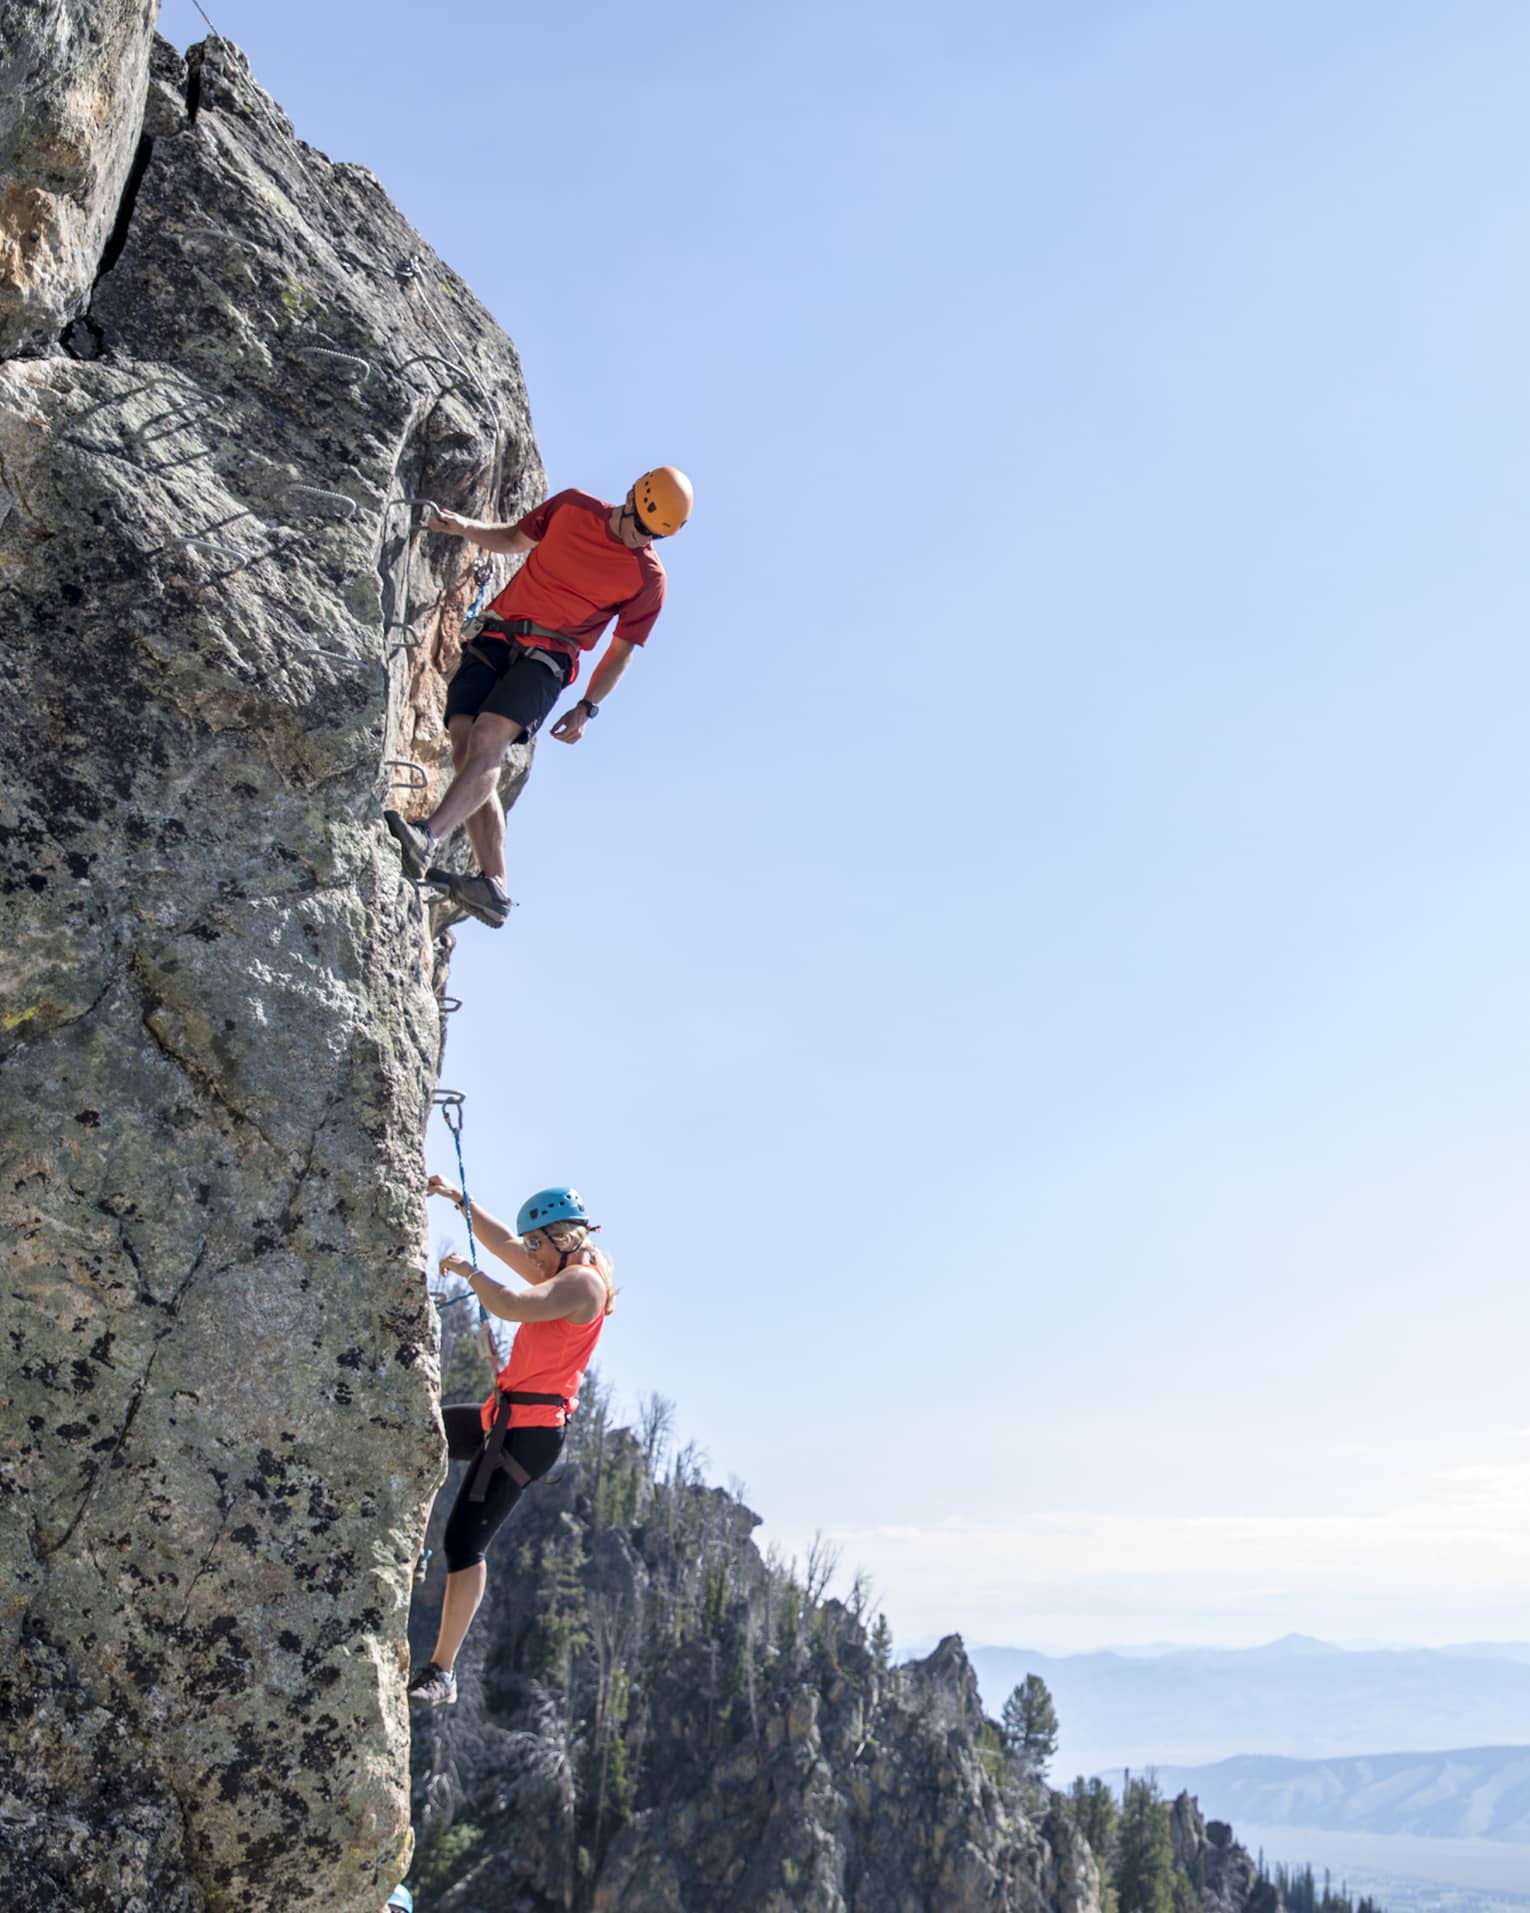 Man and woman climb steep cliff face with view of mountains in far distance 